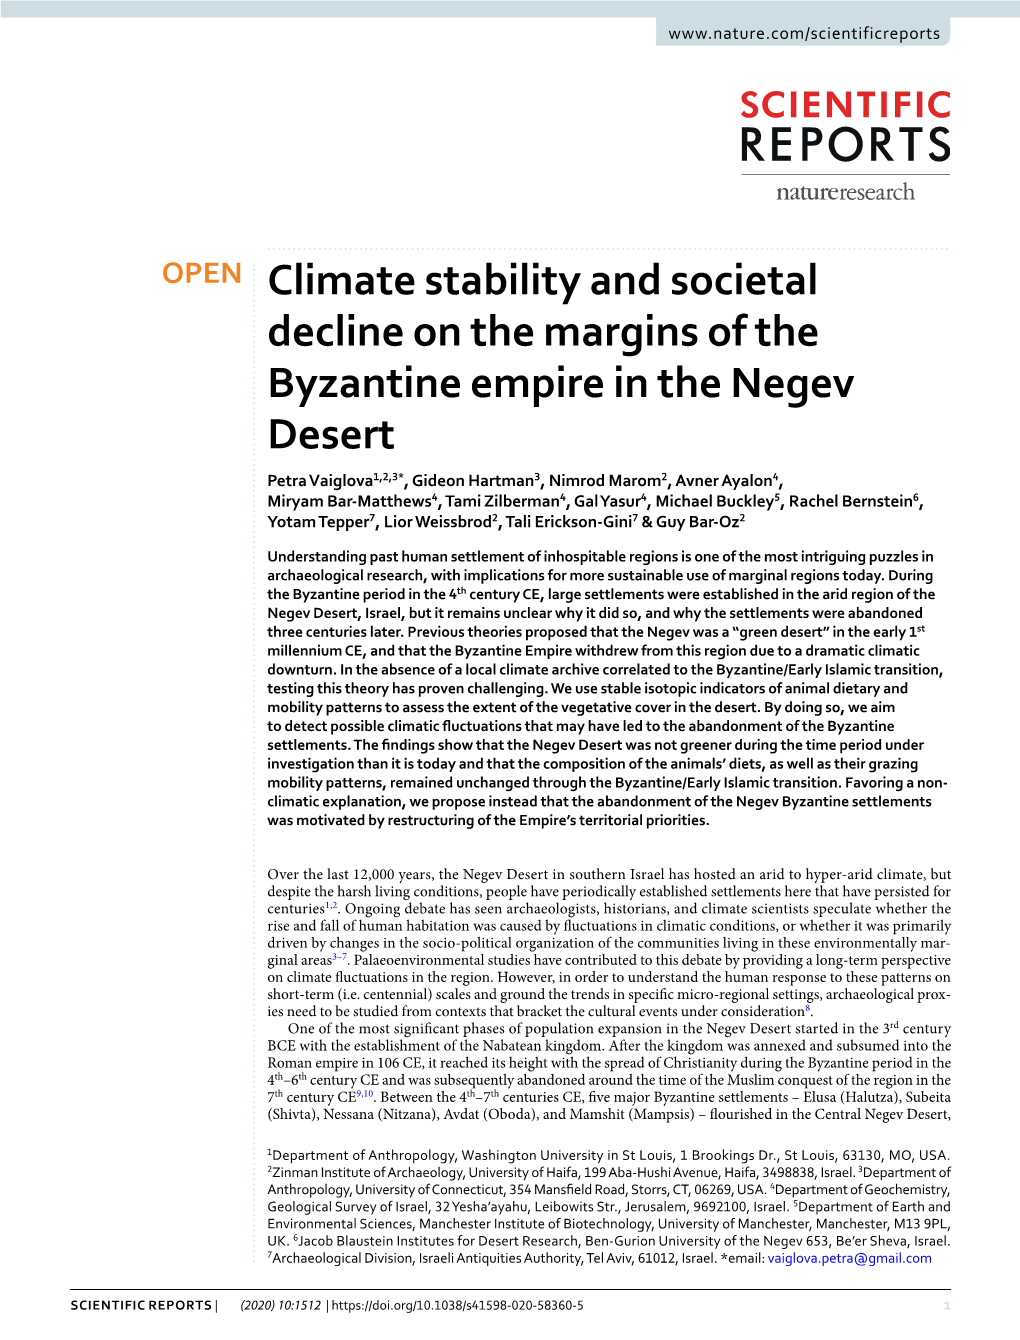 Climate Stability and Societal Decline on the Margins of the Byzantine Empire in the Negev Desert